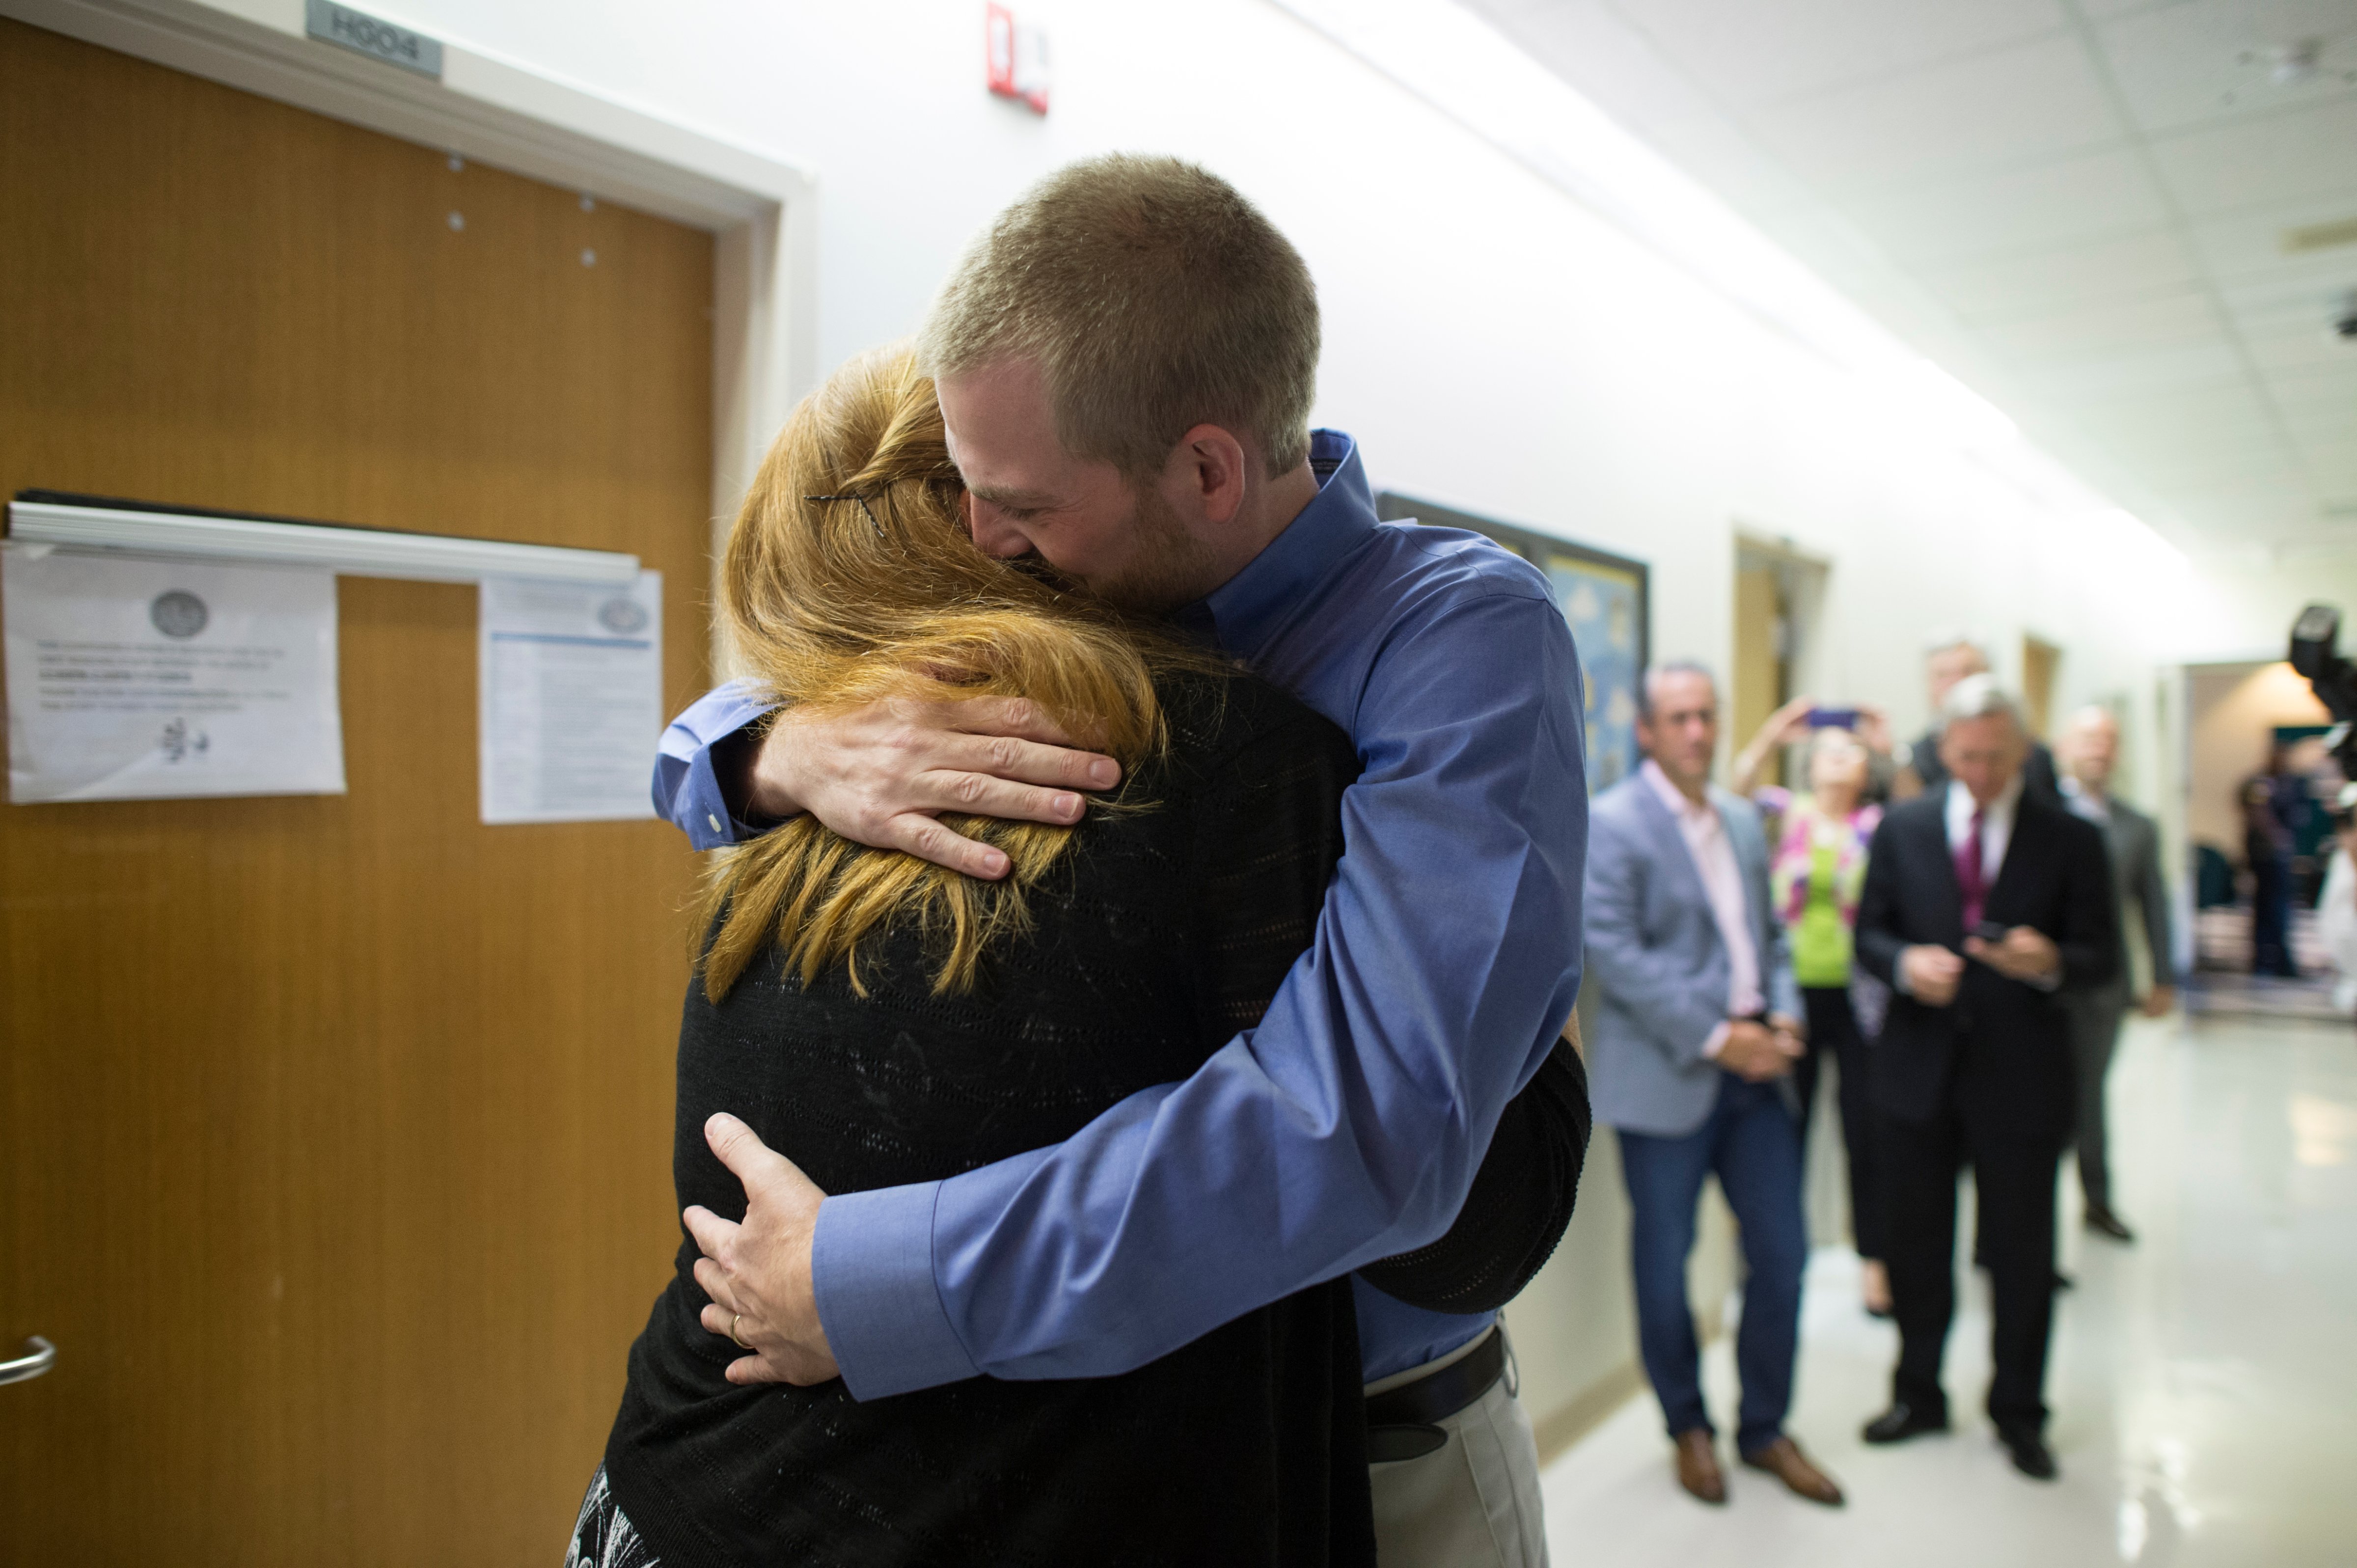 Dr. Kent Brantly hugs his wife Amber after being discharged from Emory University Hospital (David Morrison&mdash;© 2014 Samaritan's Purse)